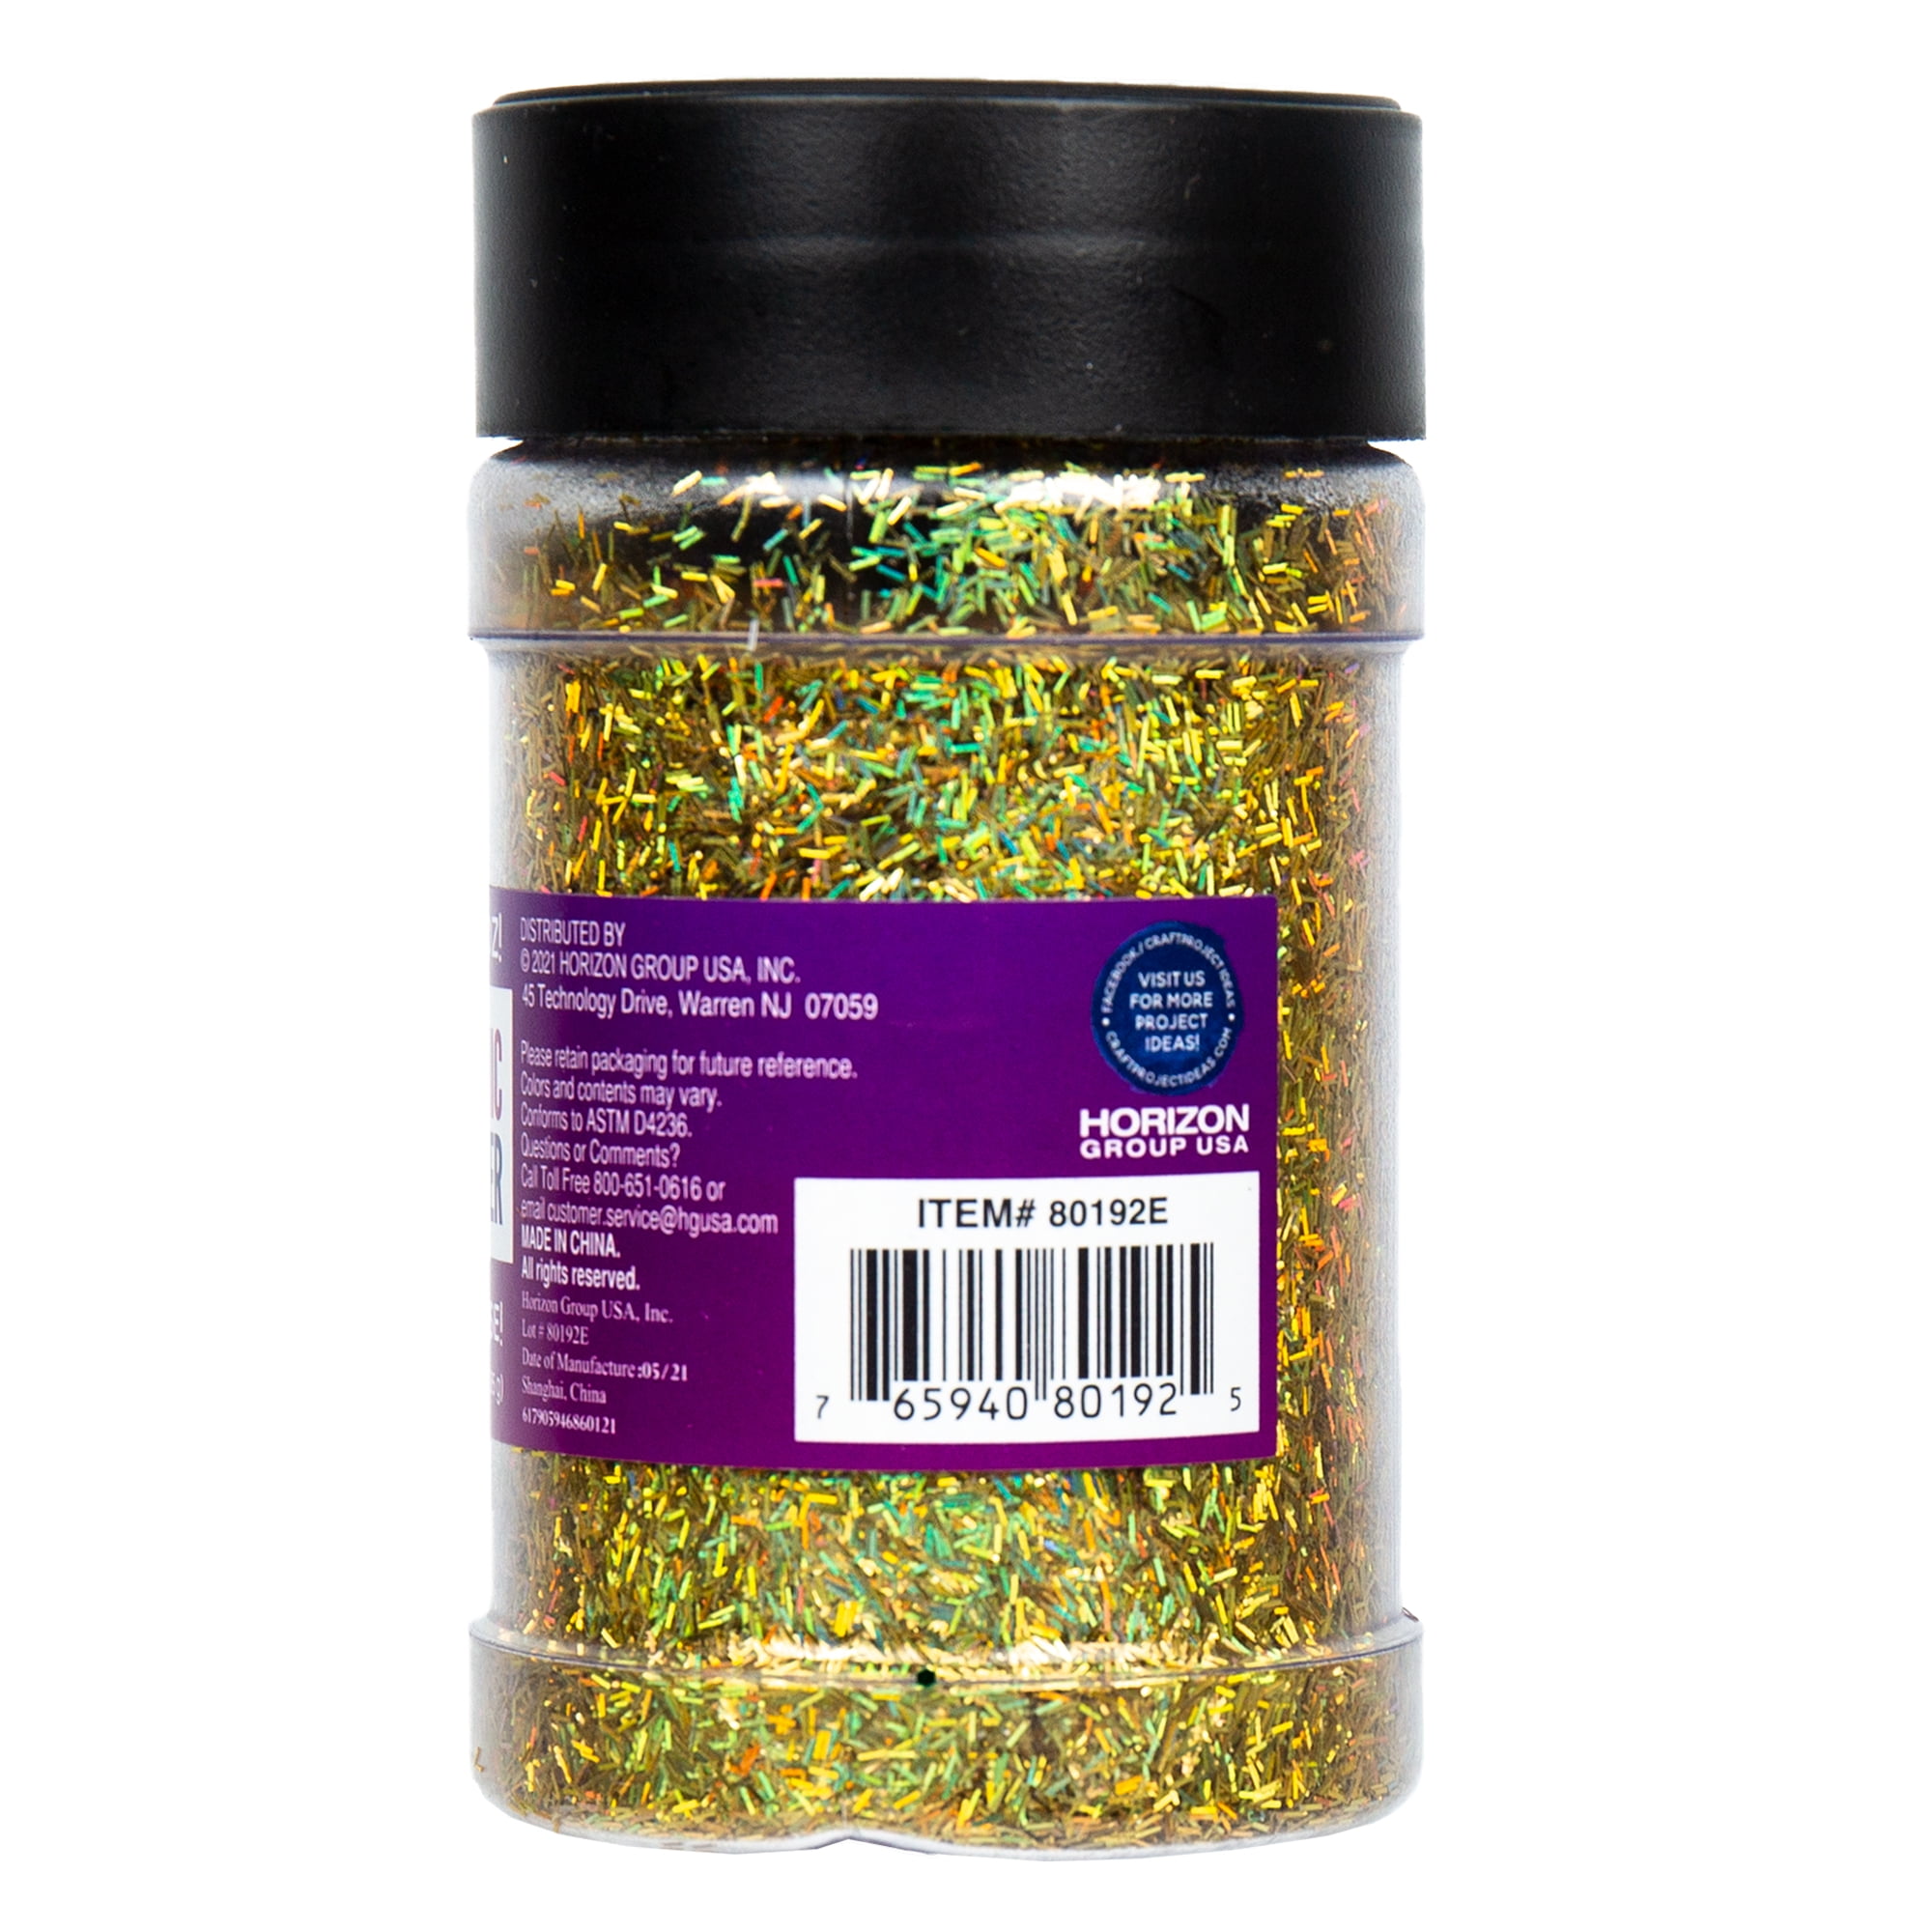 Shaker Jars Factory Supply Wholesale Holographic Glitter for Crafts  Decoration - China Ornaments and Decor price